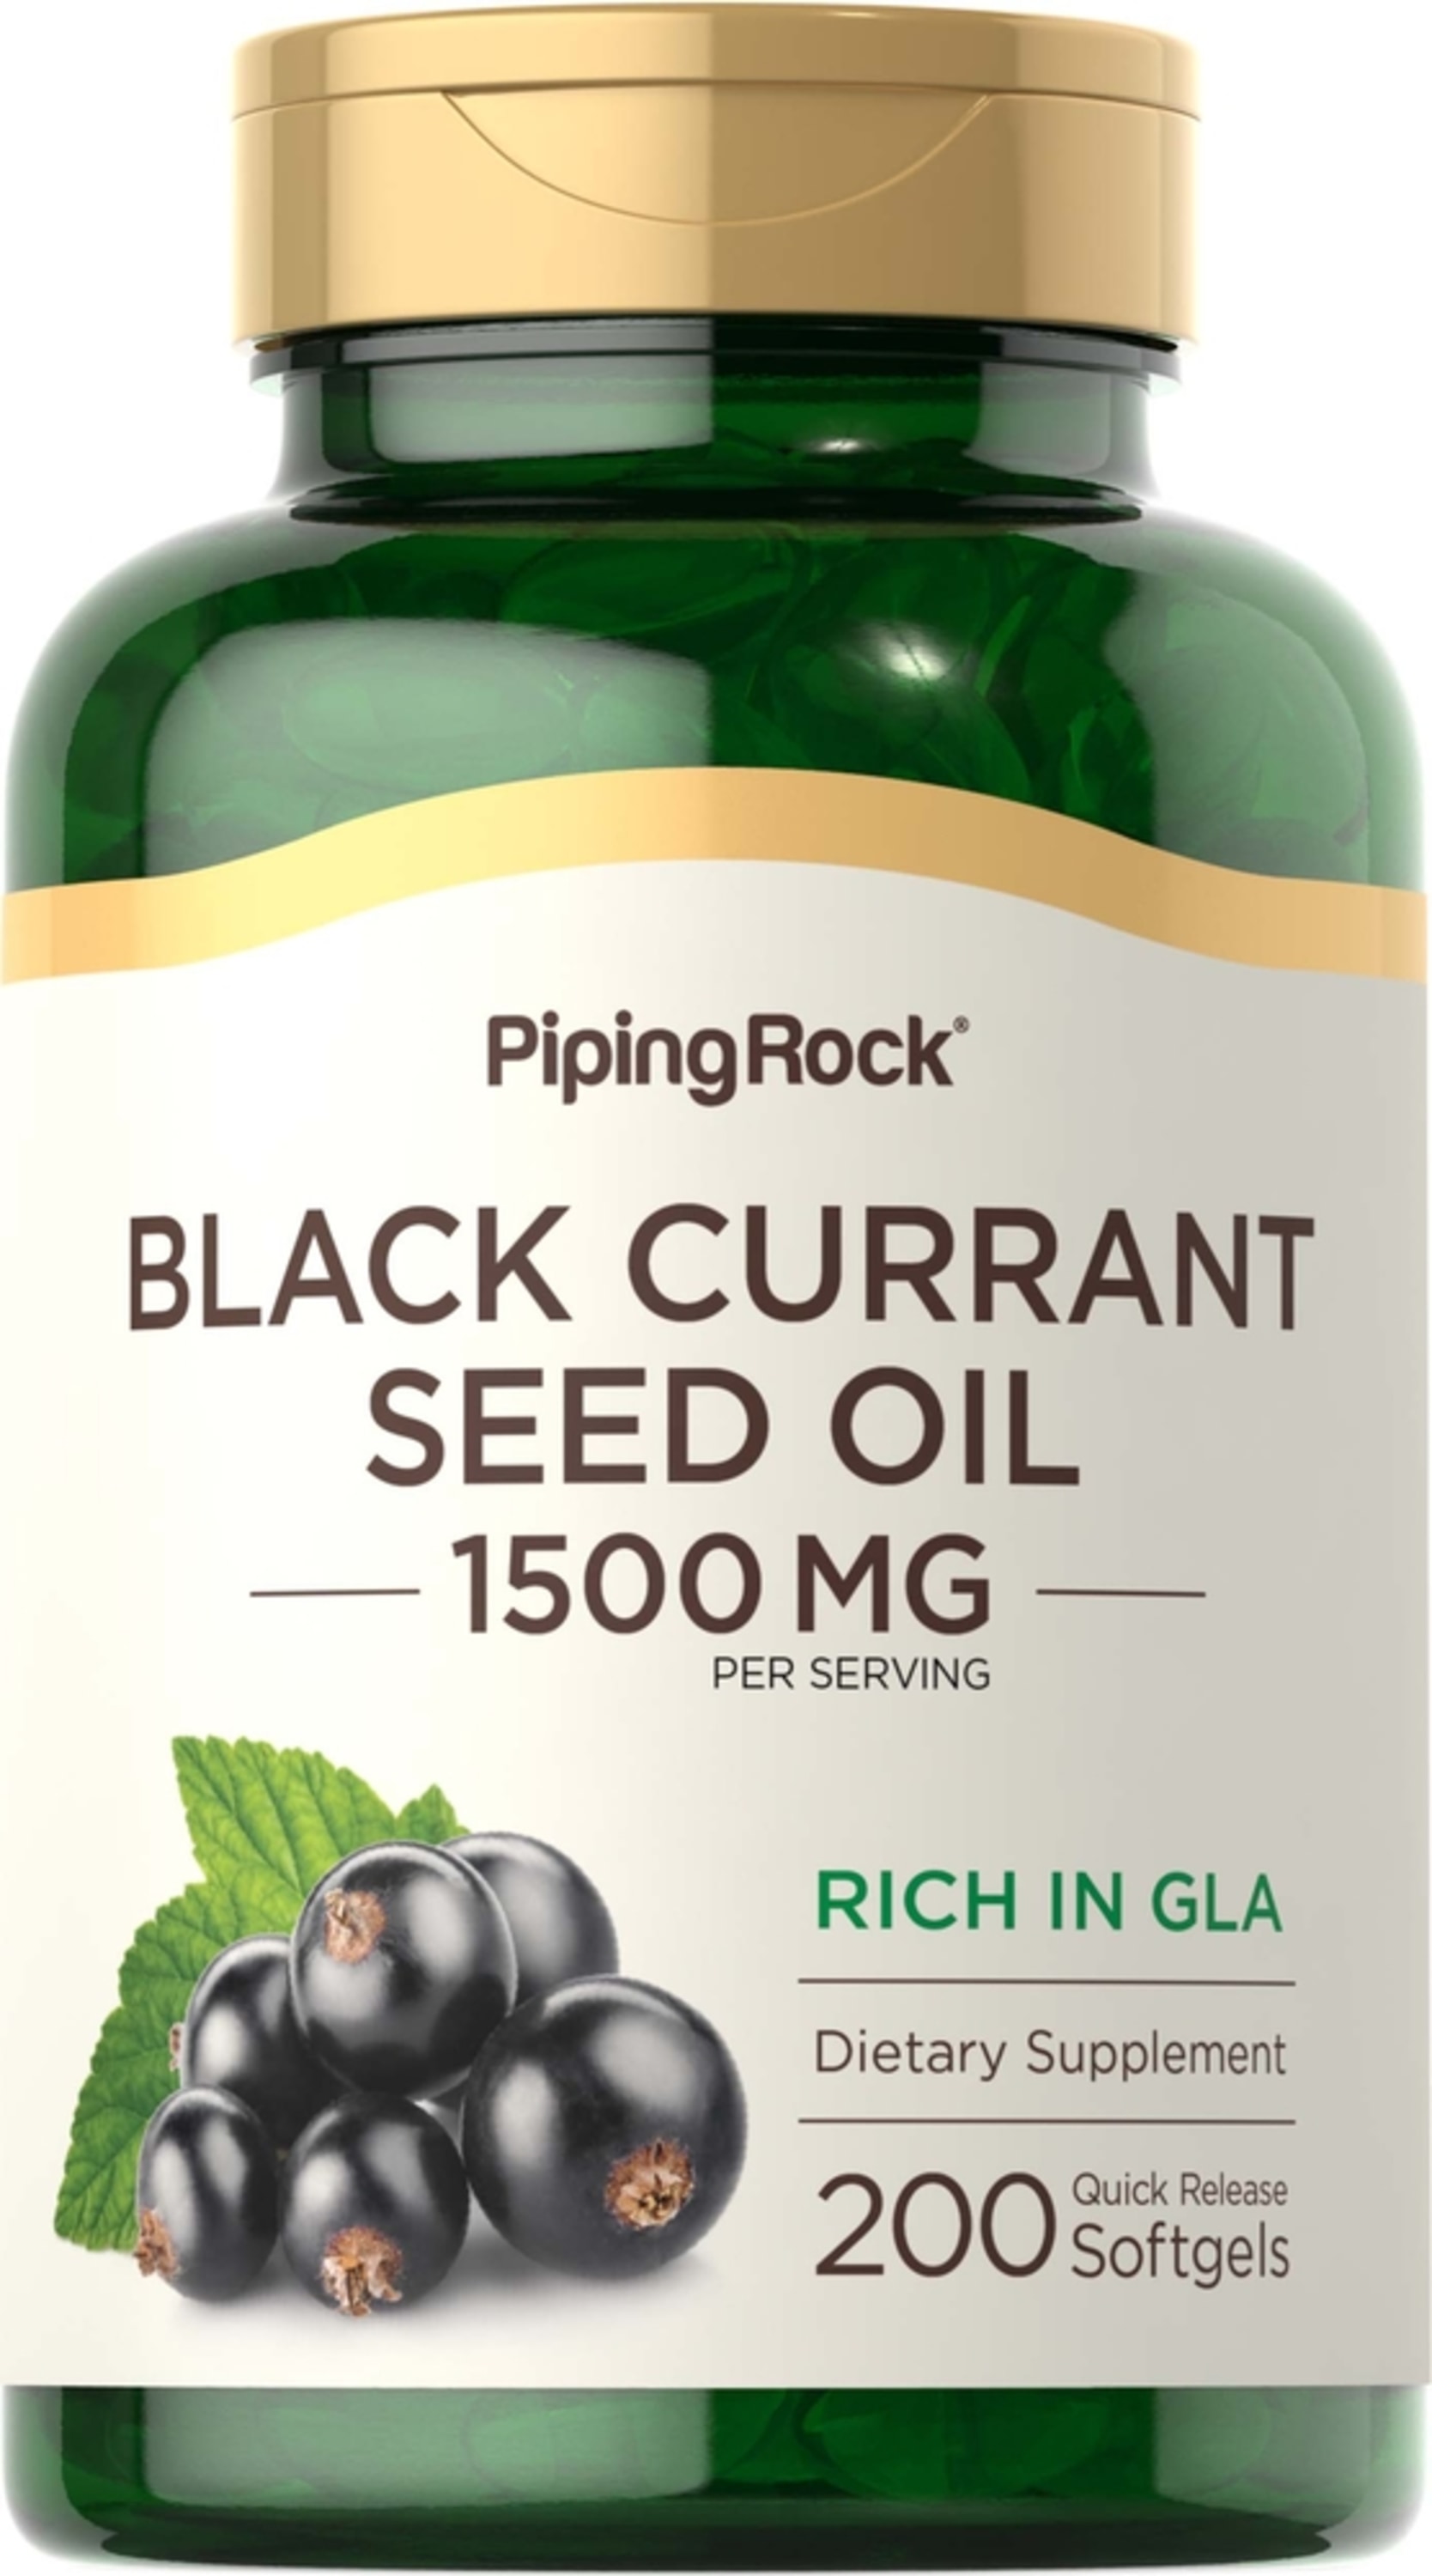 Black Currant Seed Oil, 1500 mg (per serving), 200 Quick Release Softgels |  PipingRock Health Products